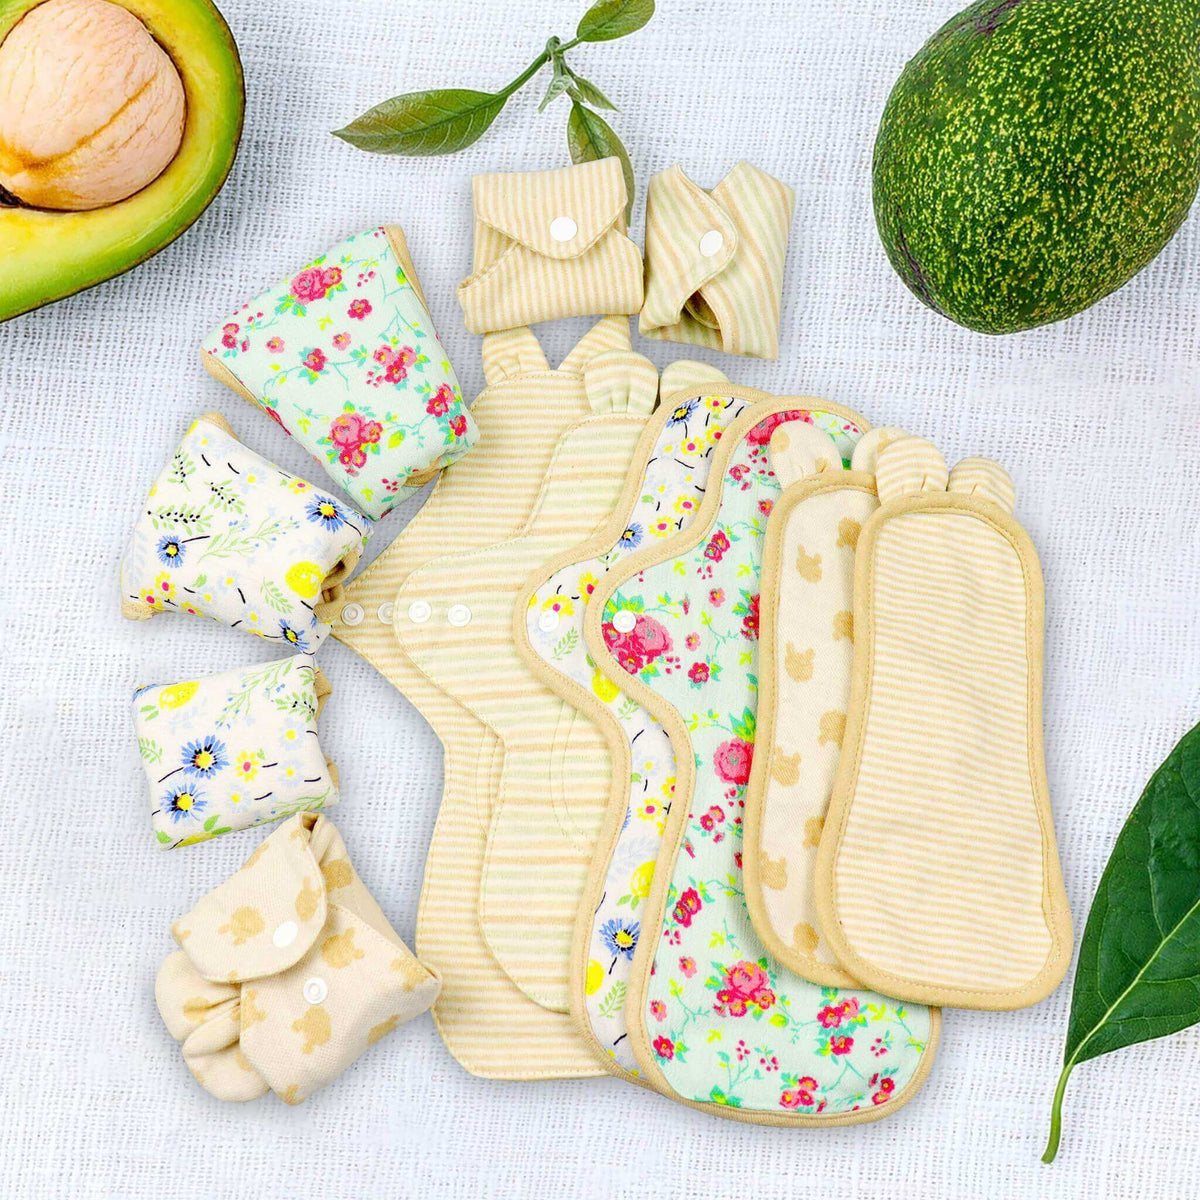 Best Organic Cotton Reusable Cloth Pads For Periods